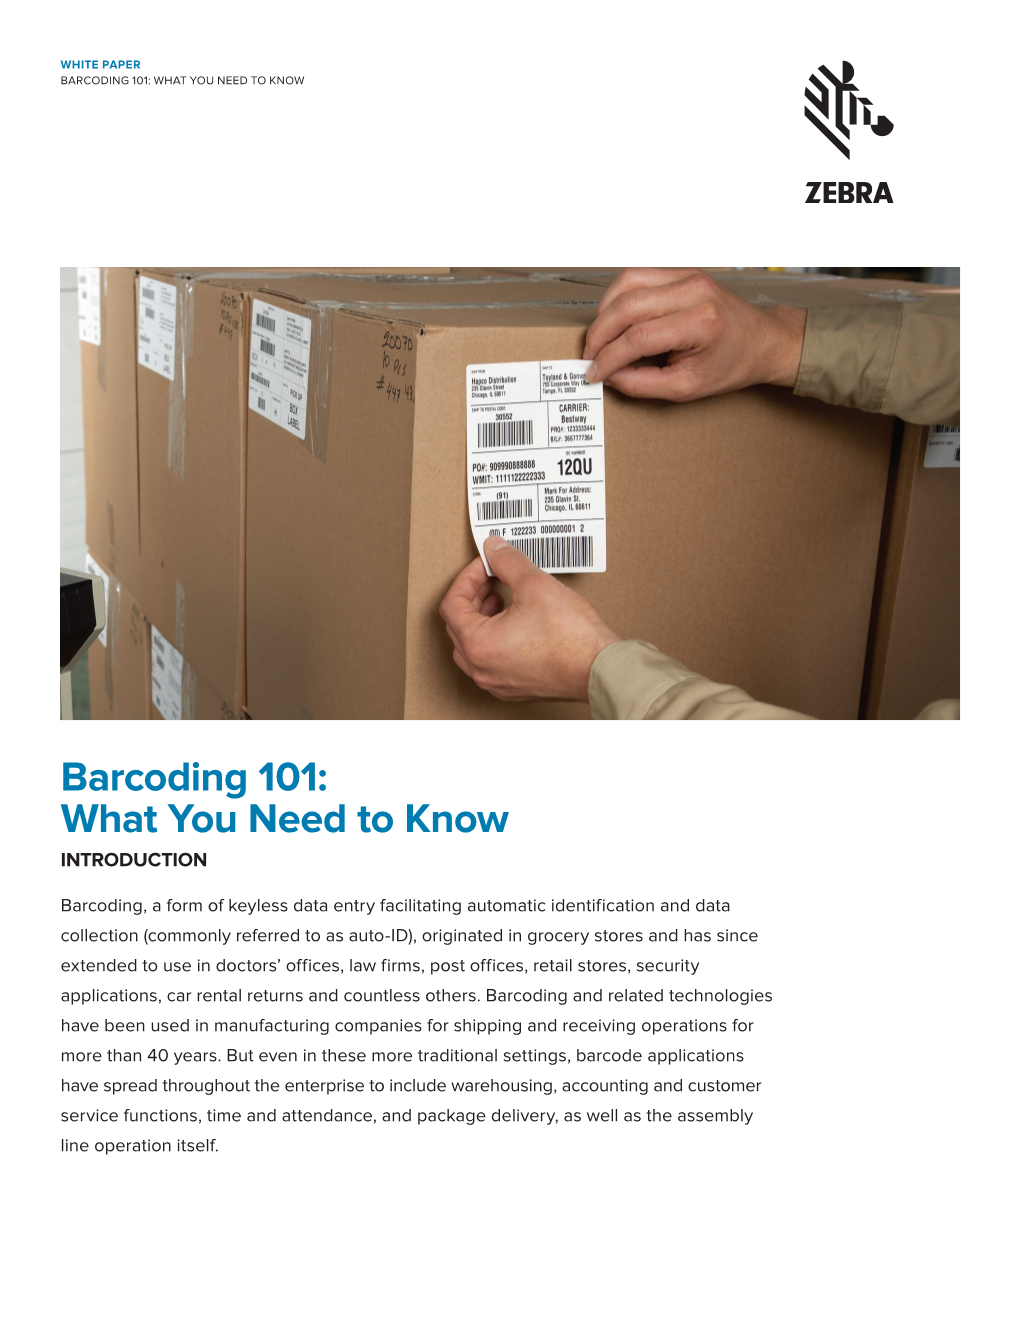 Barcoding 101: What You Need to Know